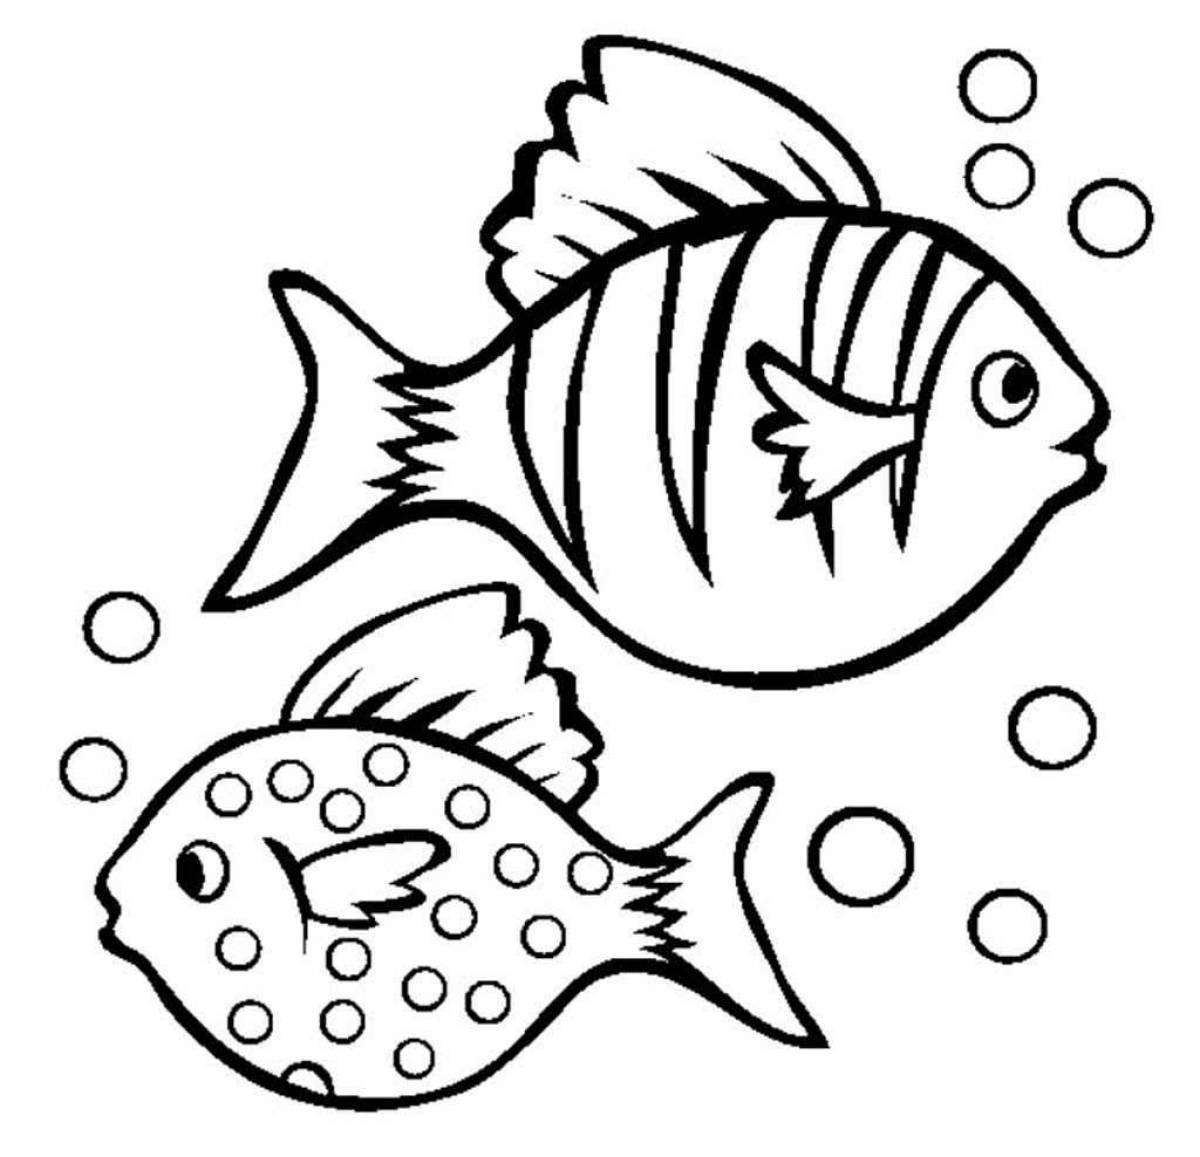 Colorful fish coloring for children 6-7 years old